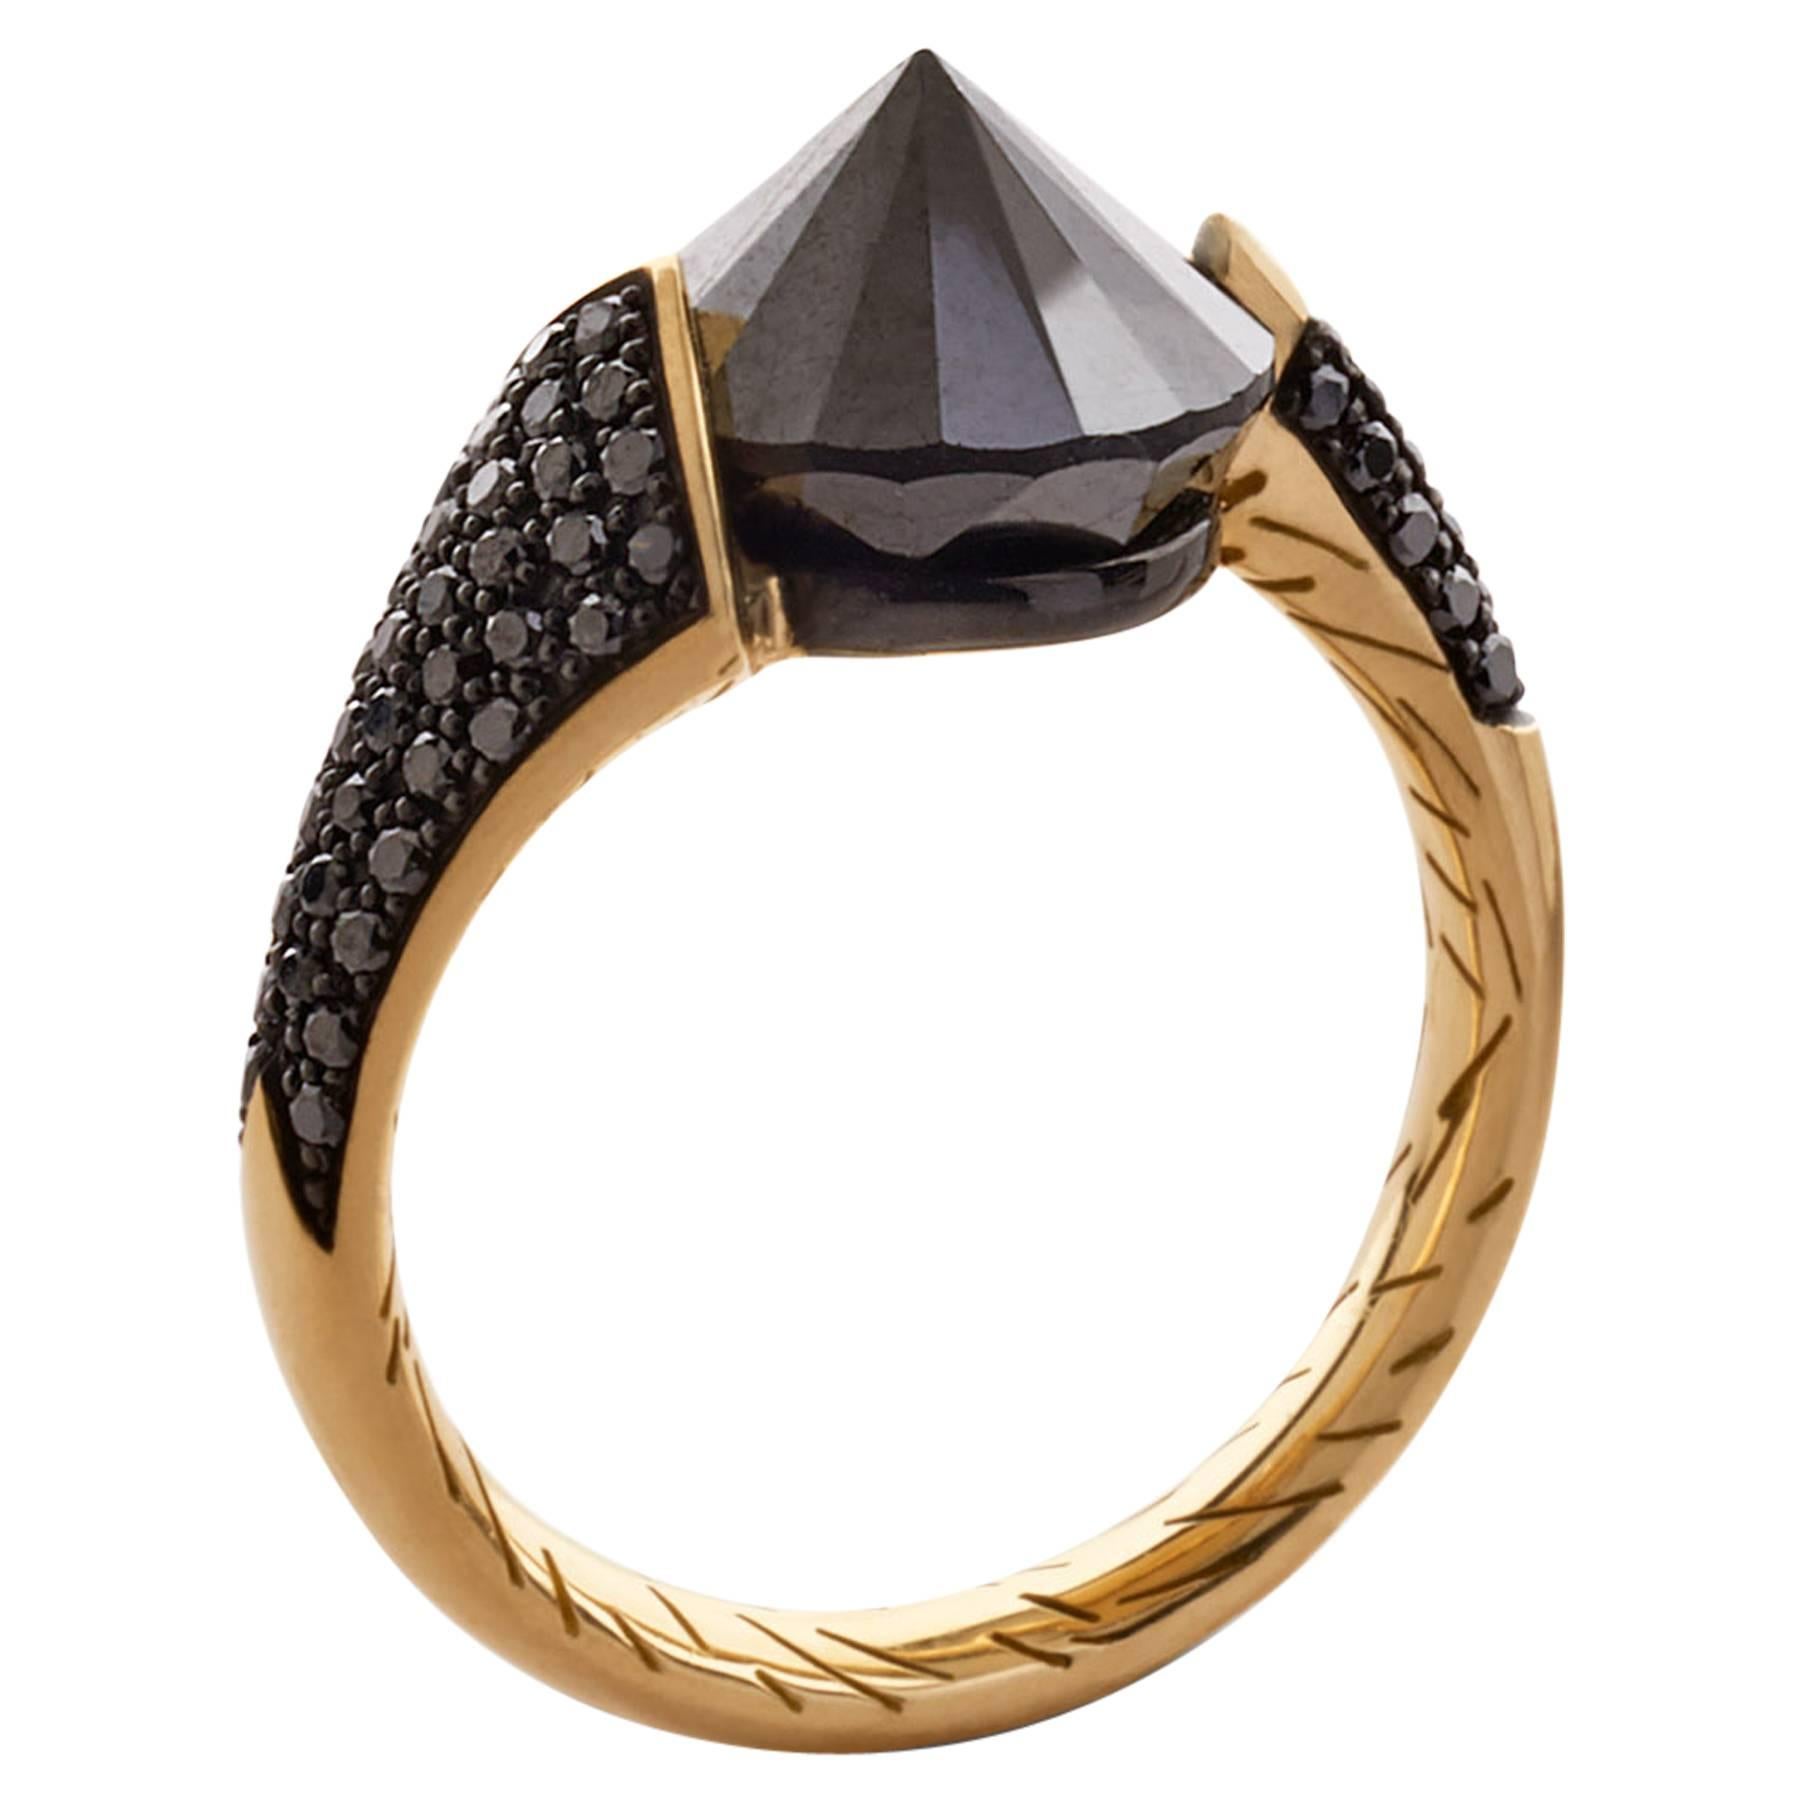 Black Diamond and Gold Bear Claw Ring by Bear Brooksbank For Sale